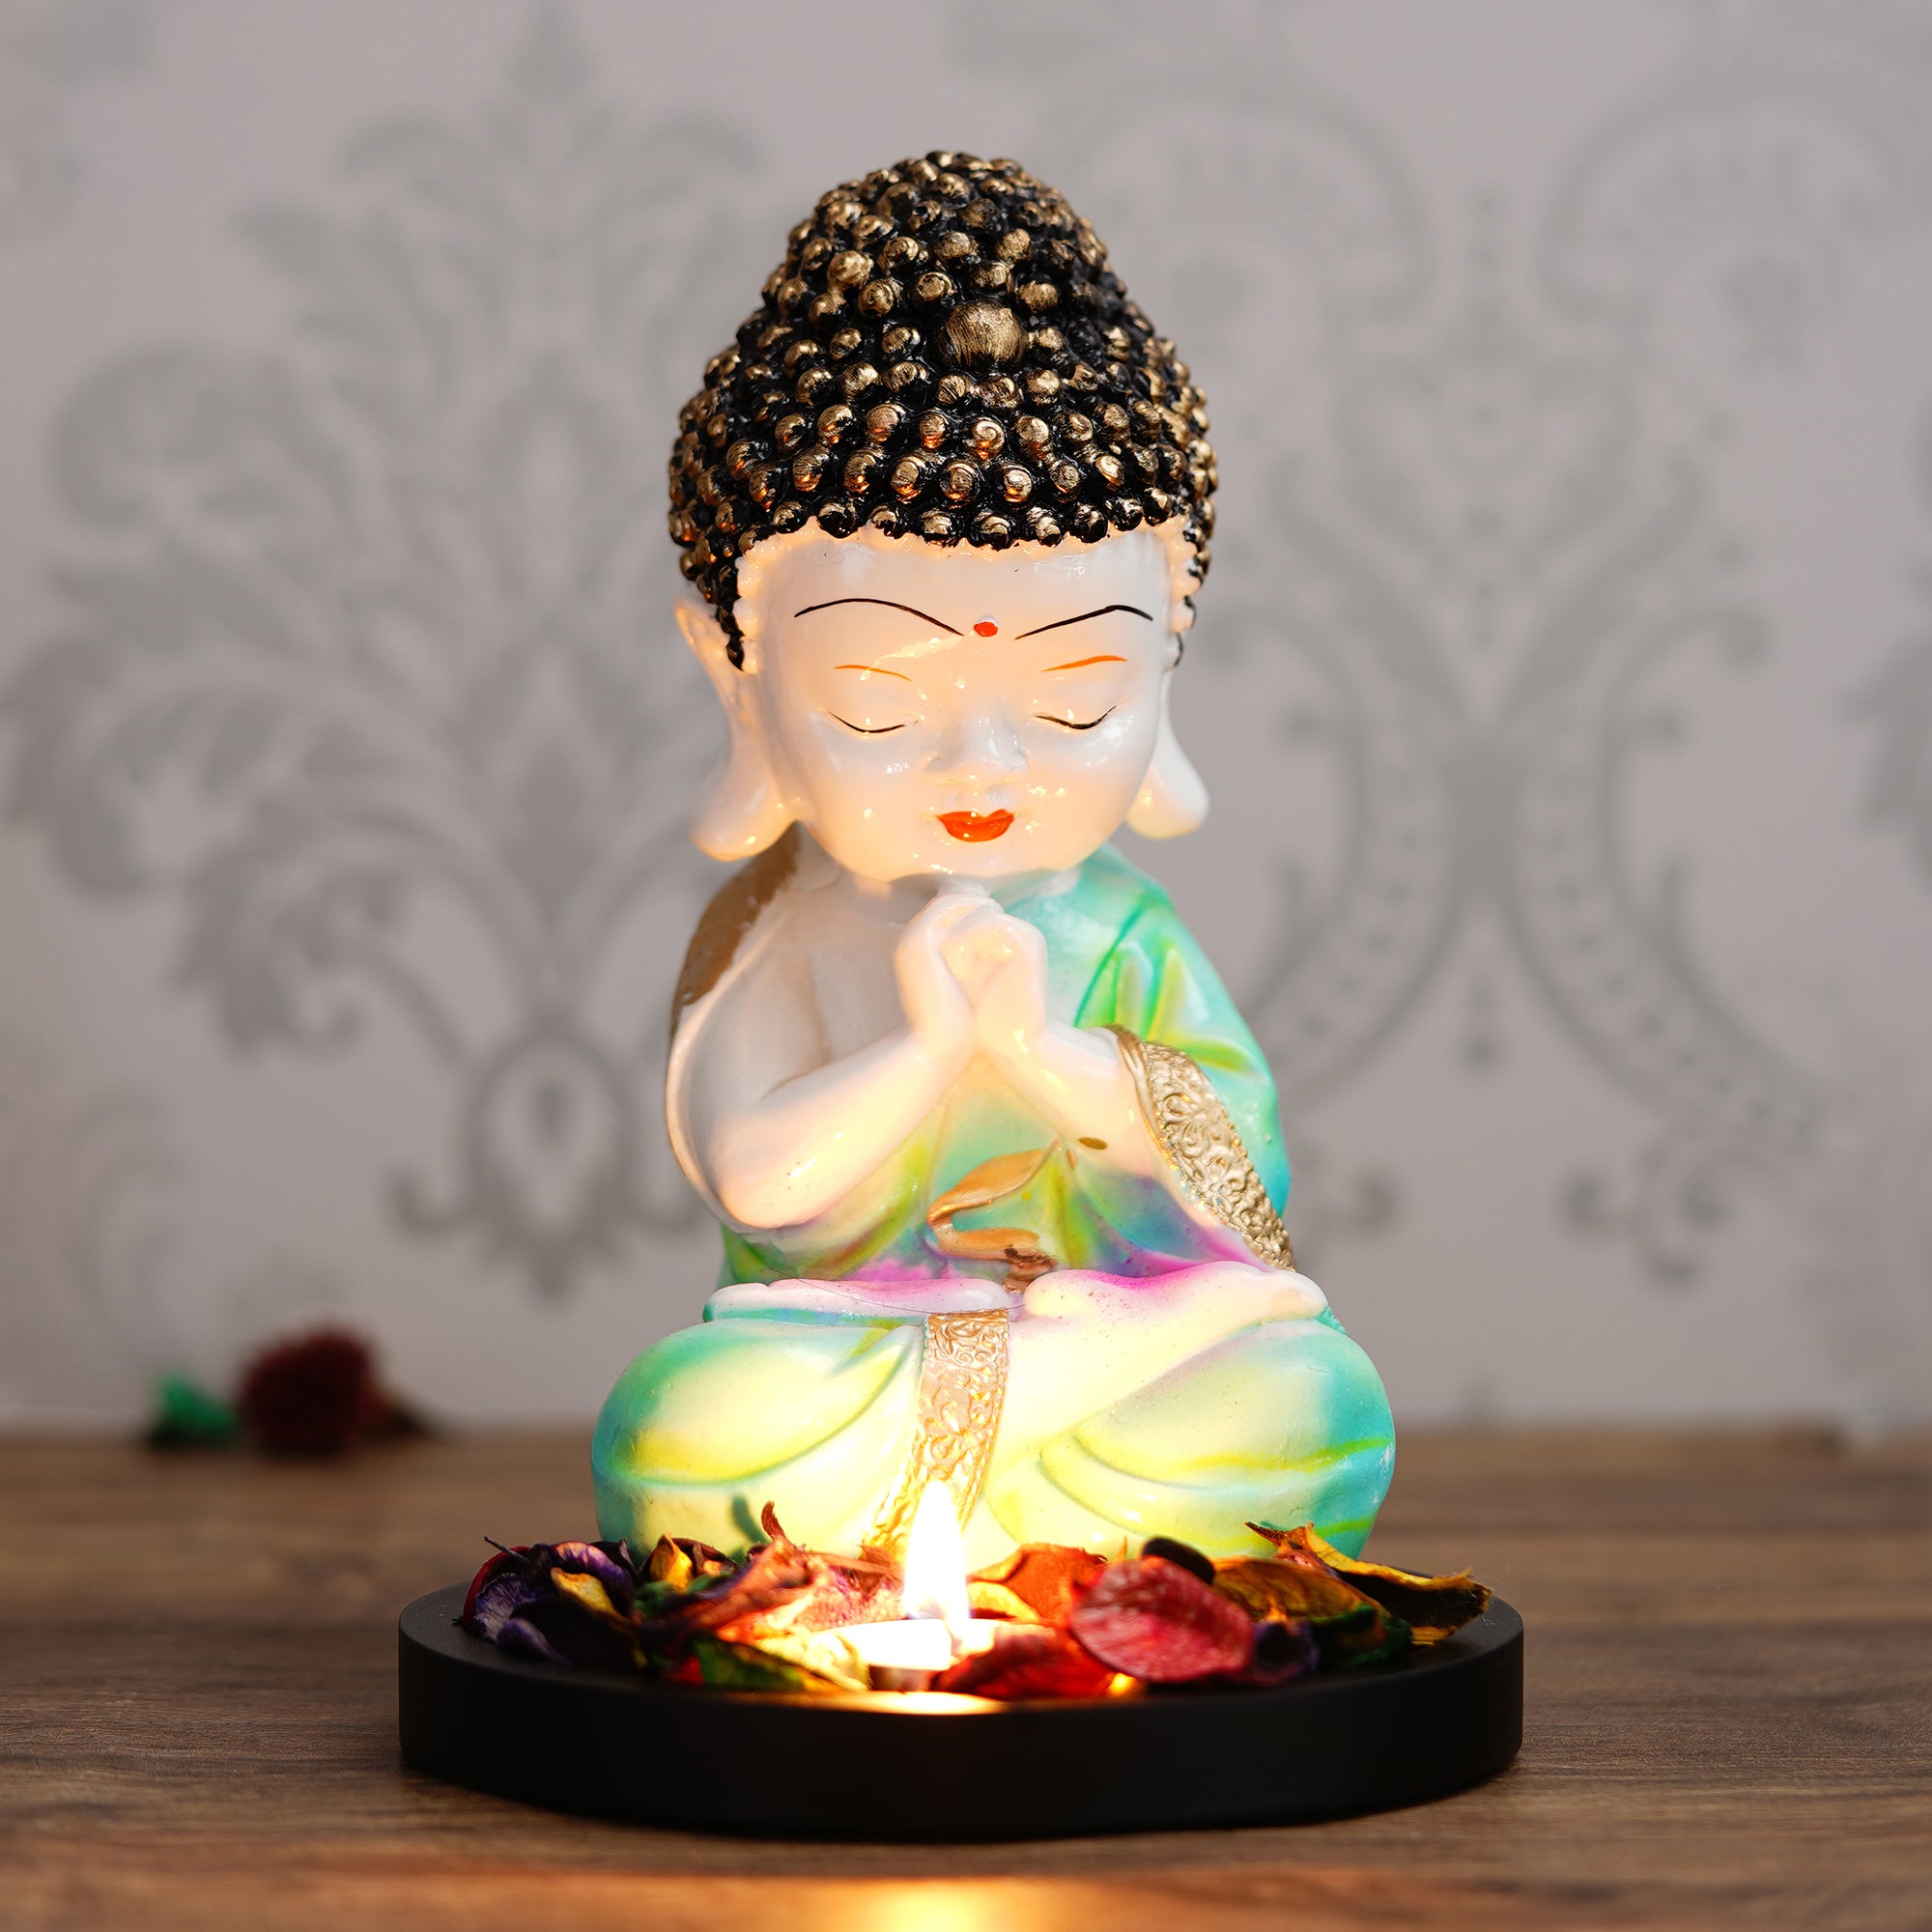 Polyresin Green and White Praying Monk Buddha Statue with Wooden Base, Fragranced Petals and Tealight 1